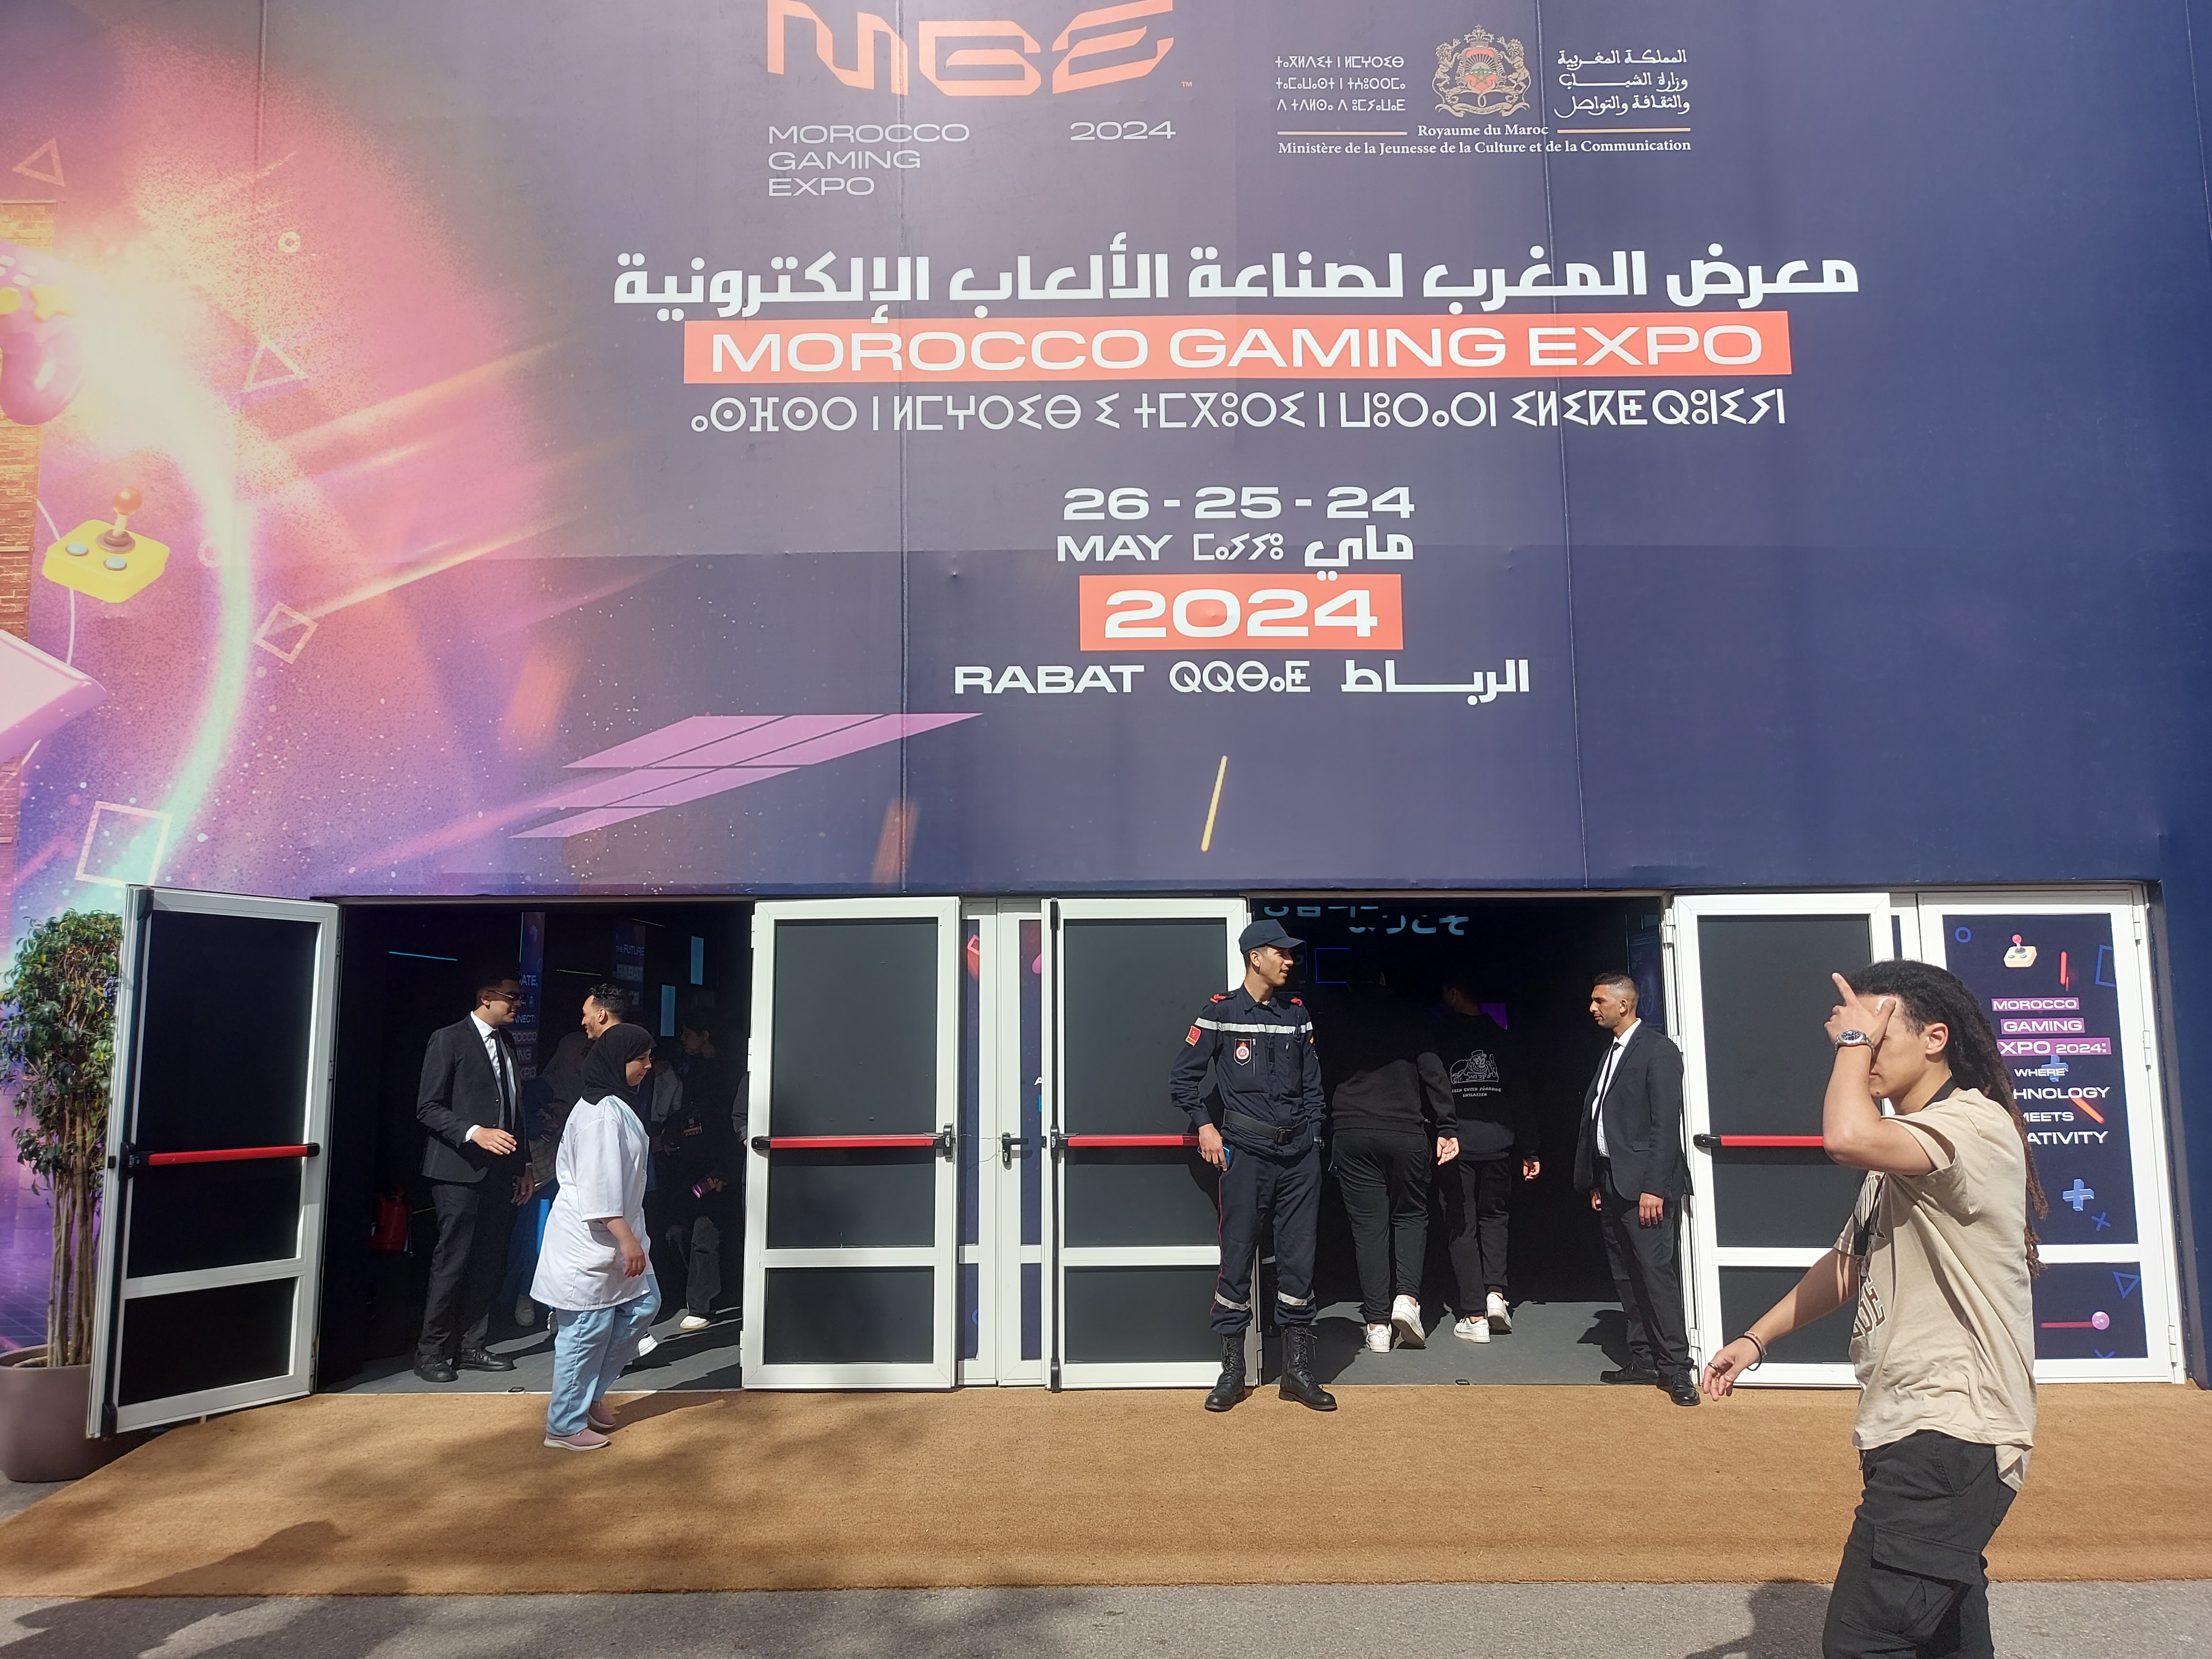 Le Morocco Gaming Expo 2024 ouvre ses portes à Rabat